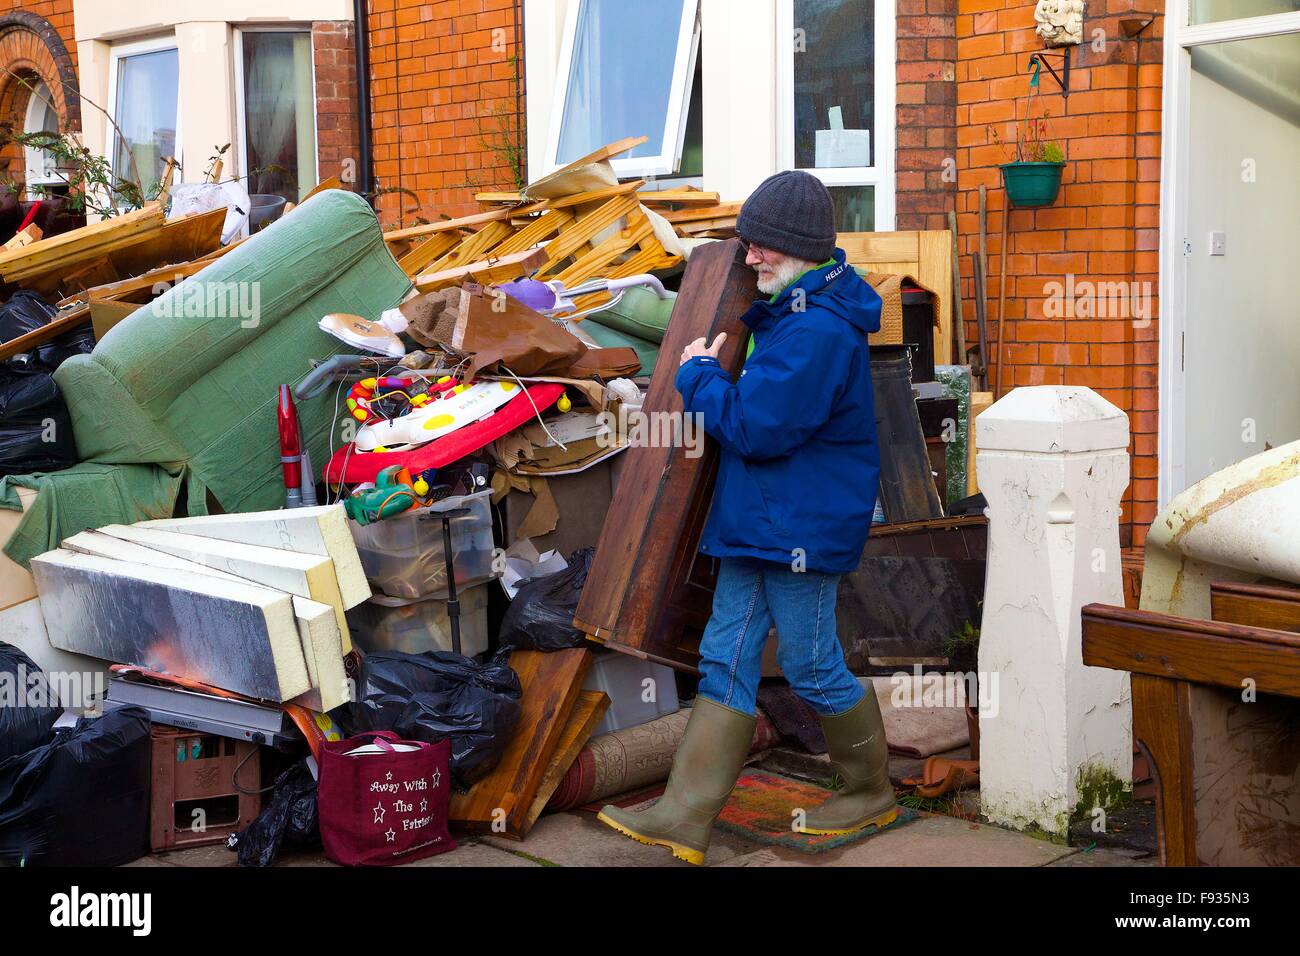 Cumbrian Floods. Carlisle, Cumbria, UK. 13 December 2015. Man taking out his flood damaged property being taken outside flooded houses. Flooding caused by Storm Desmond. Credit:  Andrew Findlay/Alamy Live News Stock Photo